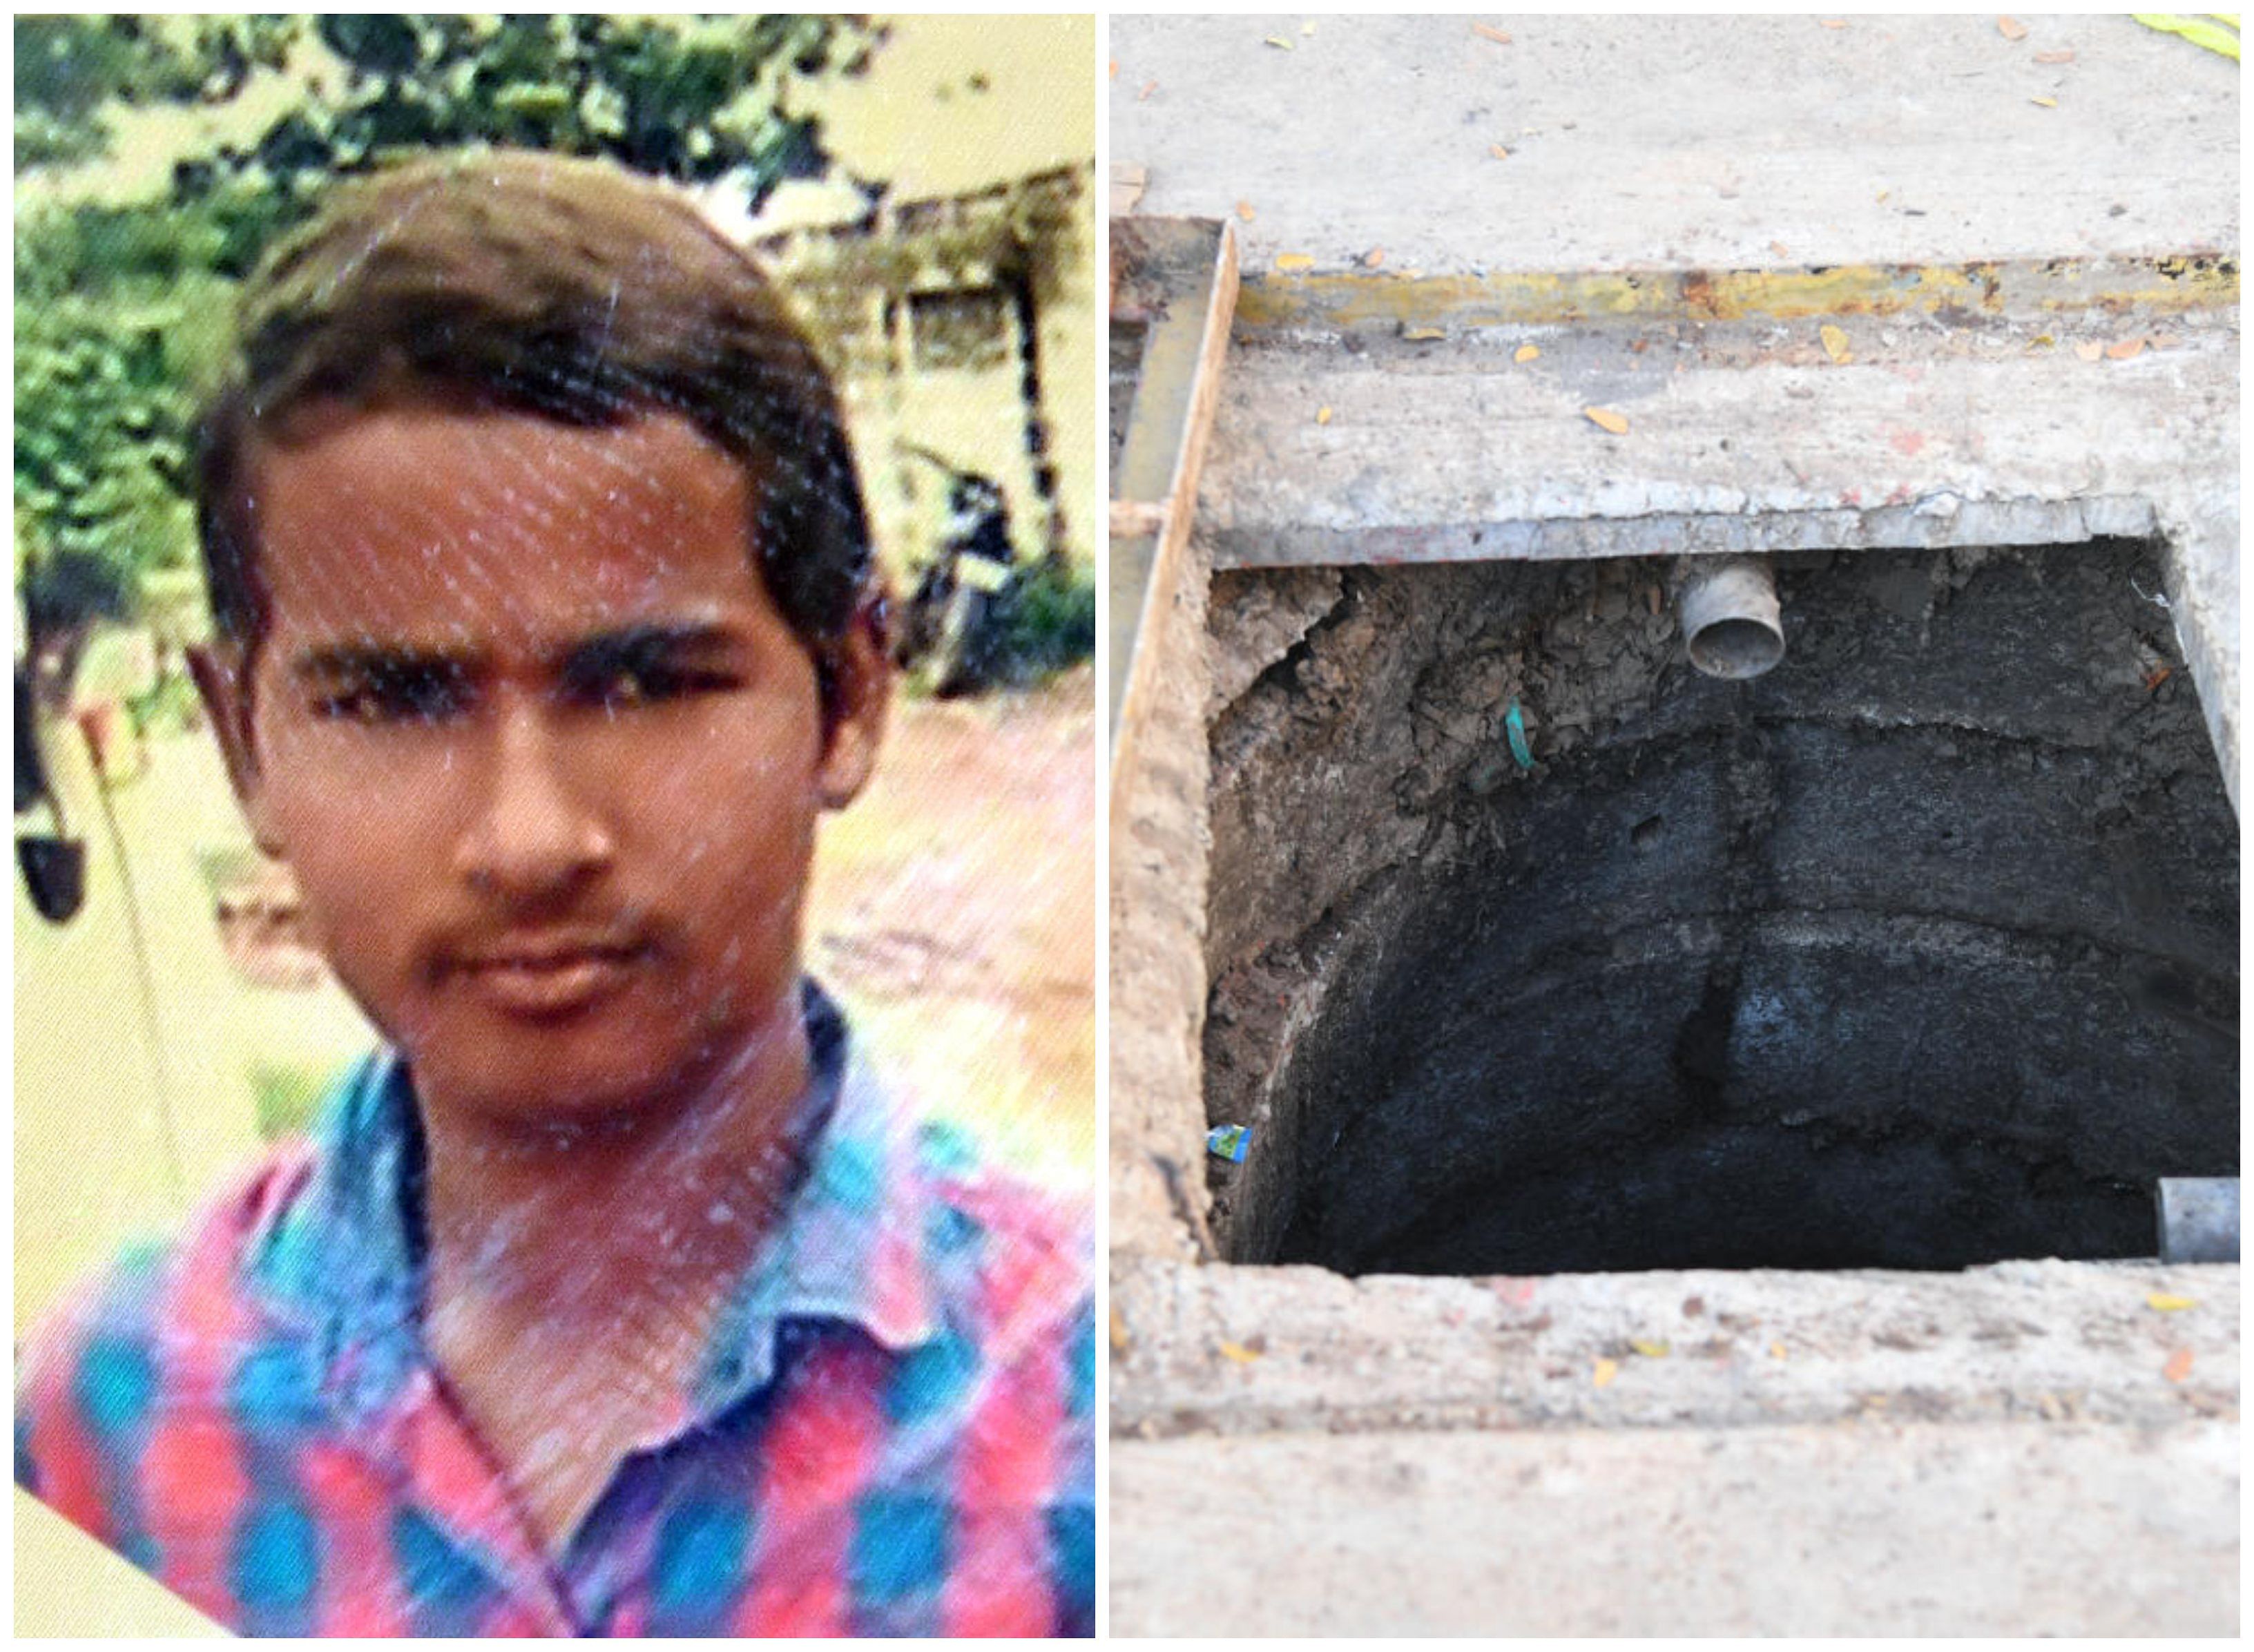 Though manual scavenging is illegal, the contractor, Marianna (50), hired the deceased Siddappa to clean the septic tank of a building managed by SSBS Jain Sangh Trust on Infantry Road. Marianna had promised Siddappa Rs 600 for the job.